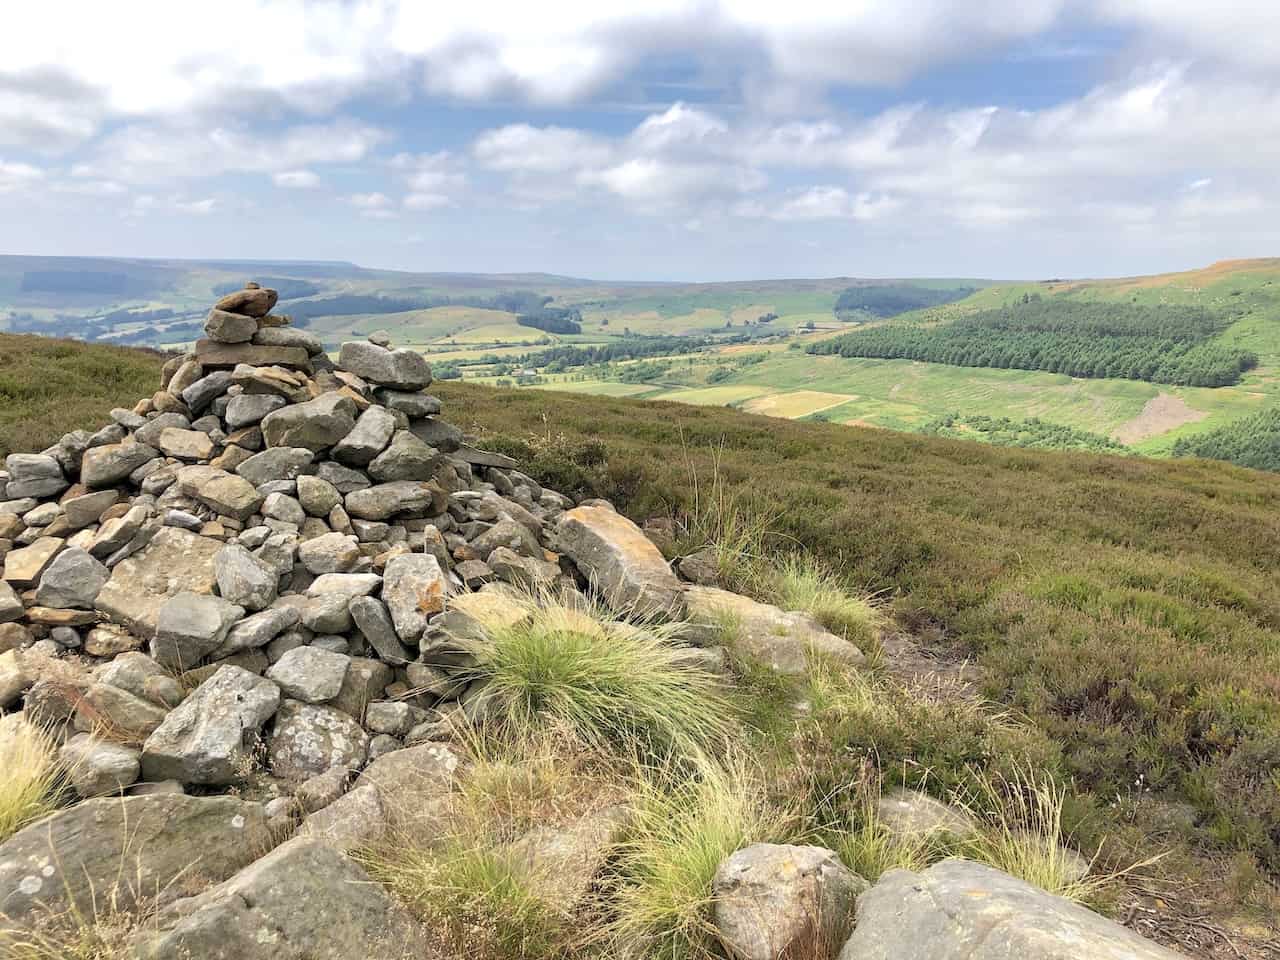 Cairn at the top of Cold Moor, standing at an elevation of 390 metres (1280 feet), marks a serene waypoint for hikers.